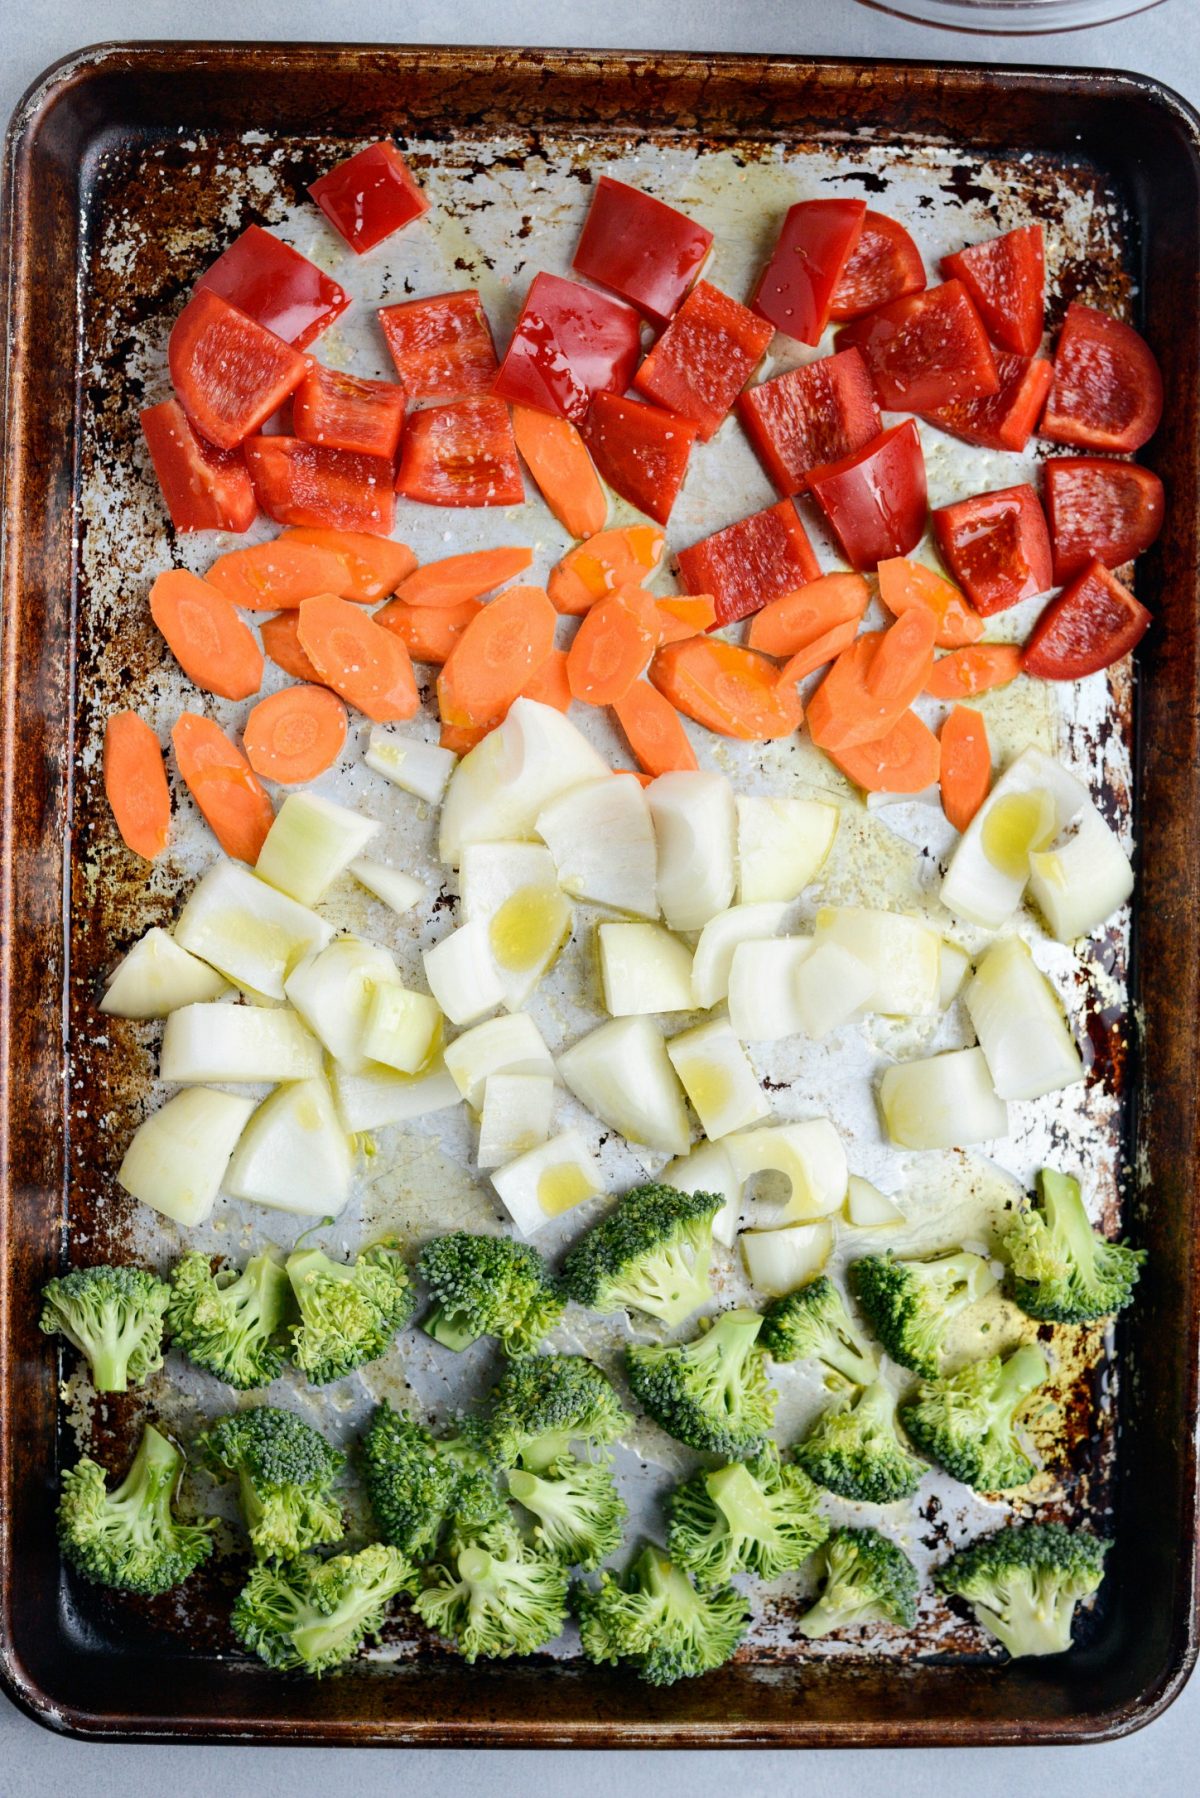 chopped red bell pepper, slice carrots, chopped onions and broccoli florets with olive oil and kosher salt on a rimmed sheet pan